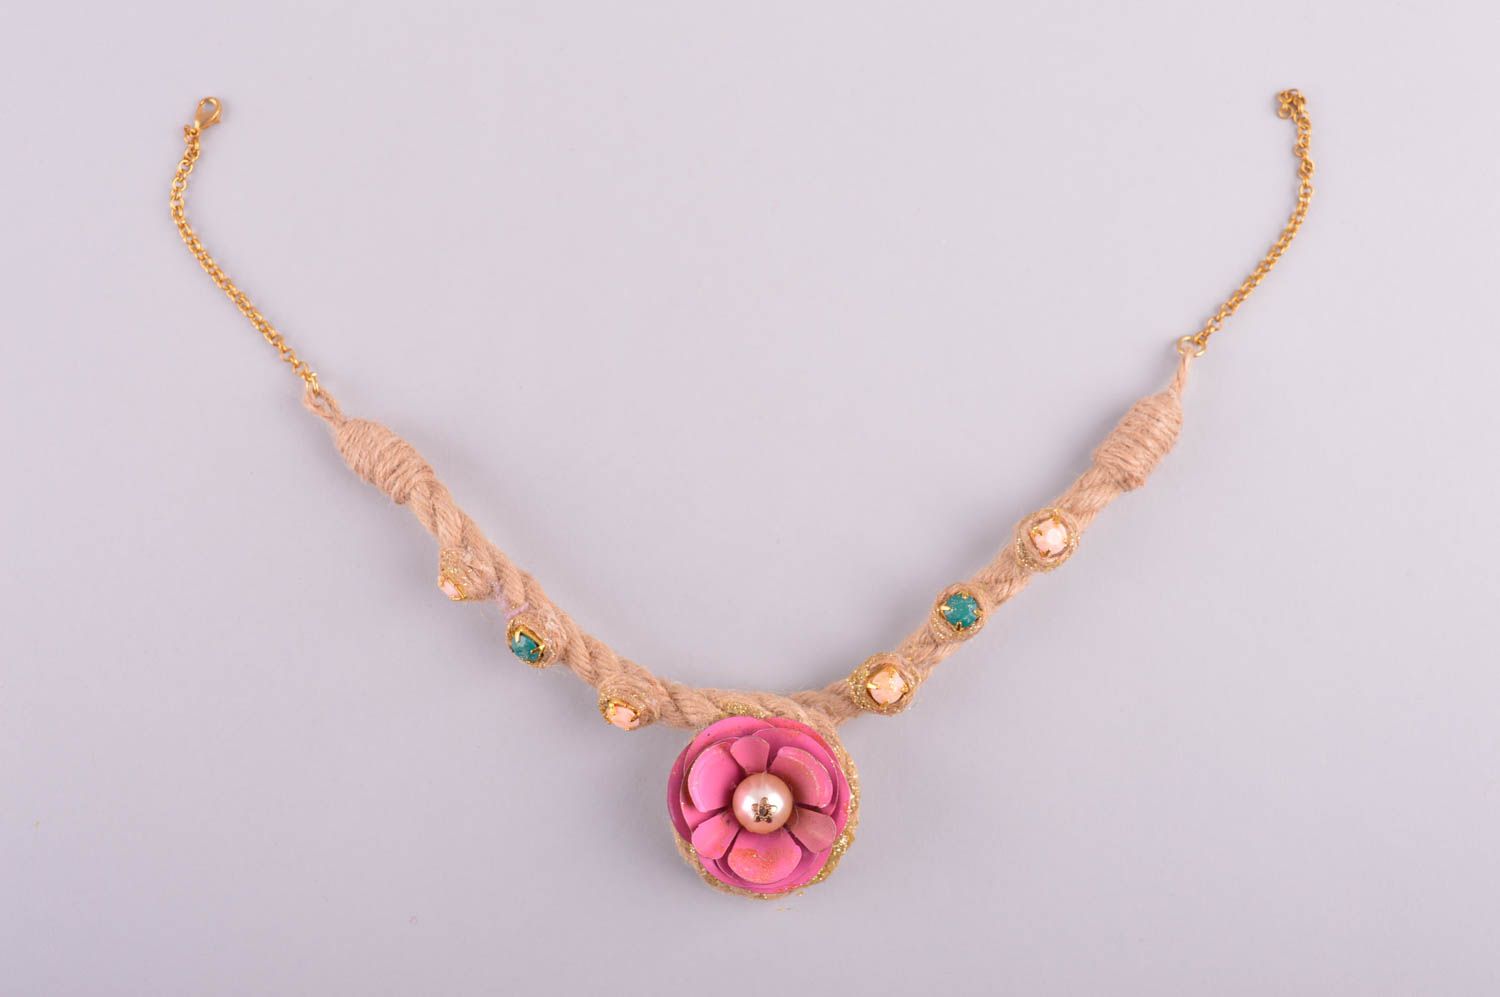 Handmade necklace thread necklace design necklace with plastic flower women gift photo 5